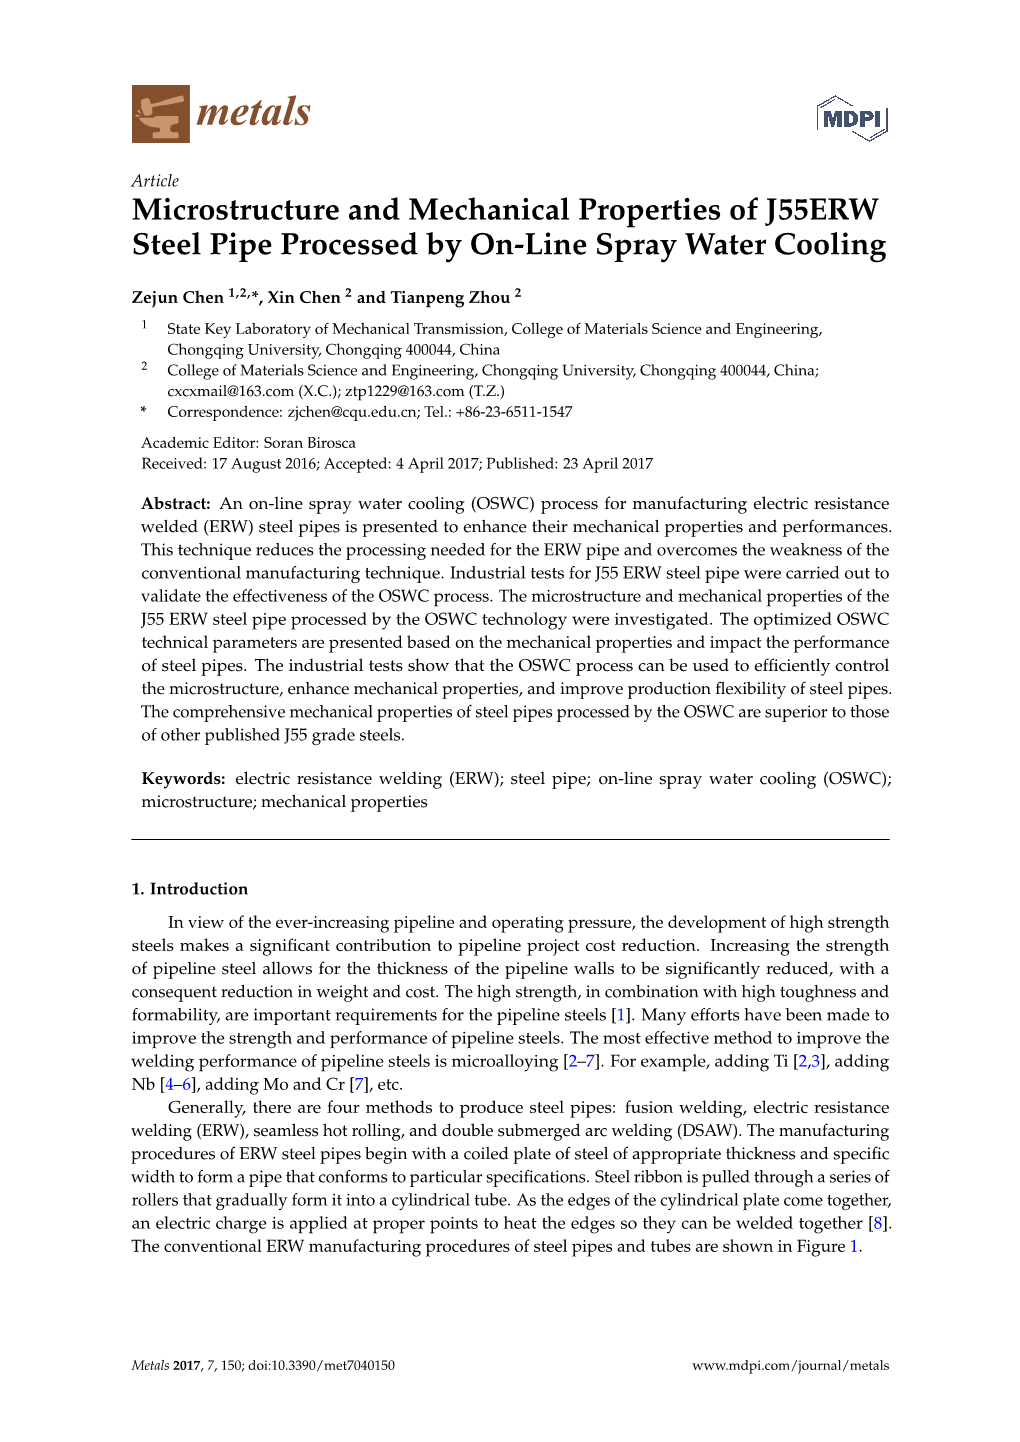 Microstructure and Mechanical Properties of J55ERW Steel Pipe Processed by On-Line Spray Water Cooling